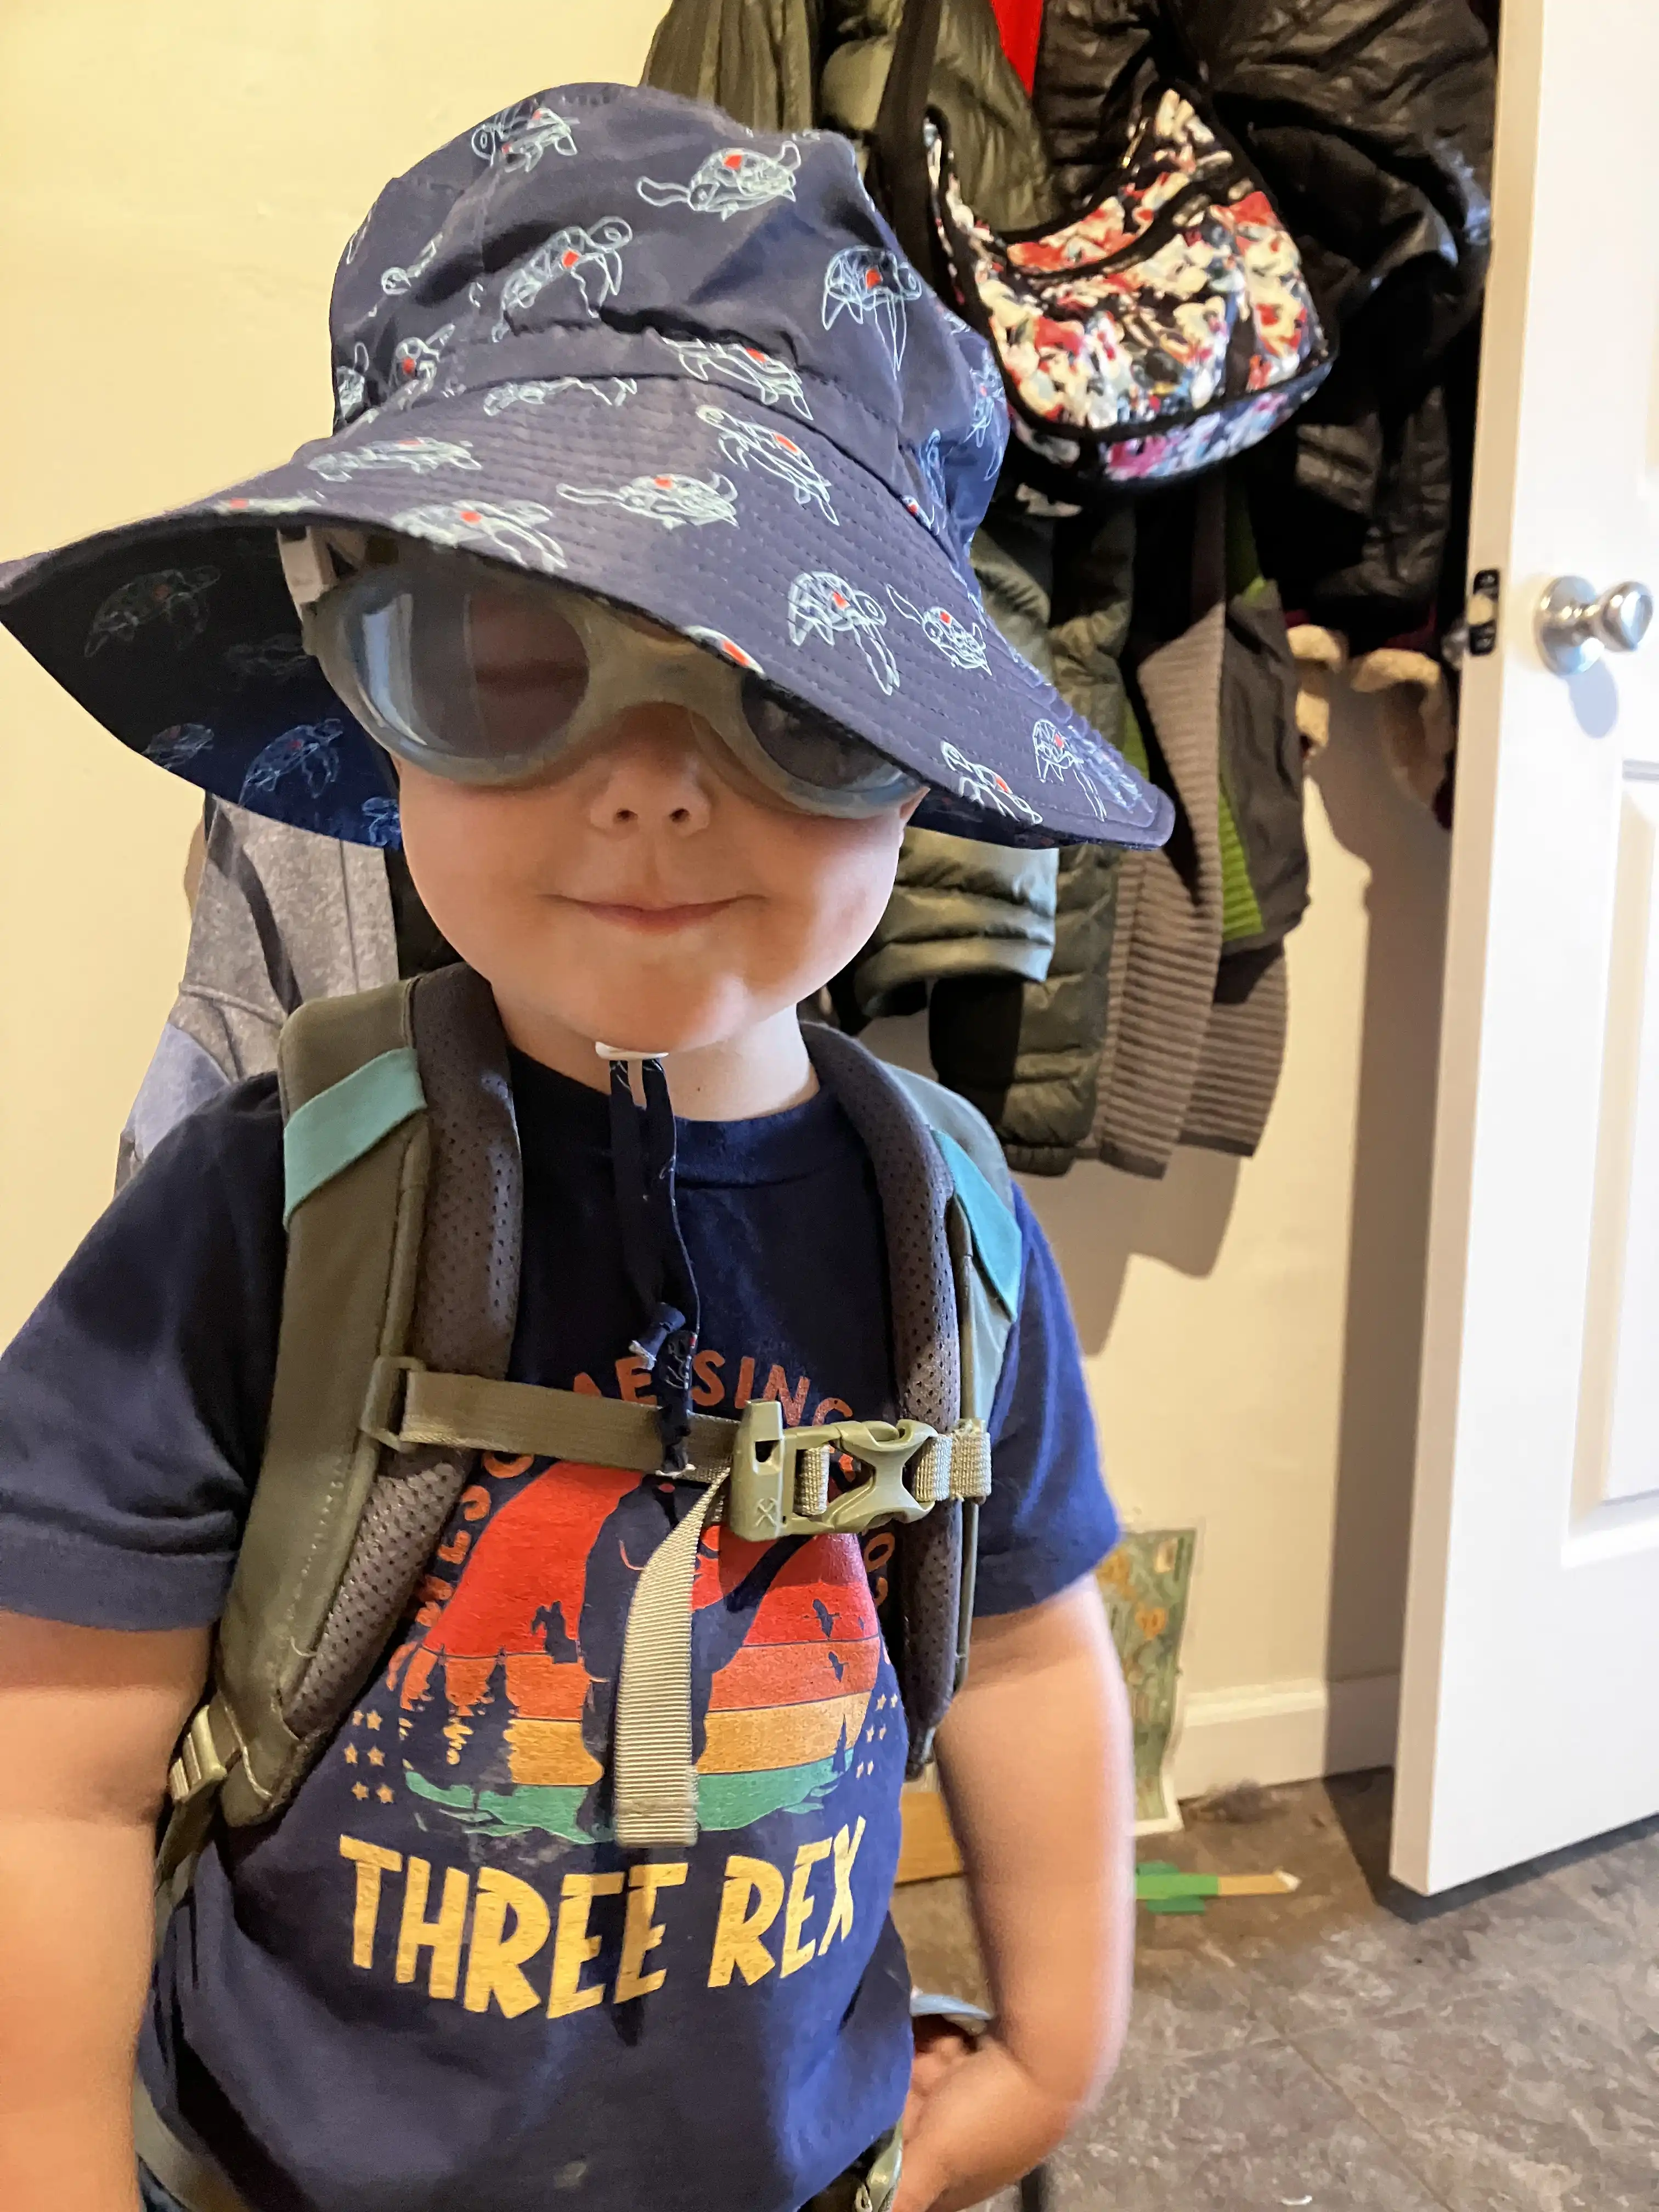 Royal in a boonie hat and blue swim goggles, wearing a grey backpack, ready for a hike.